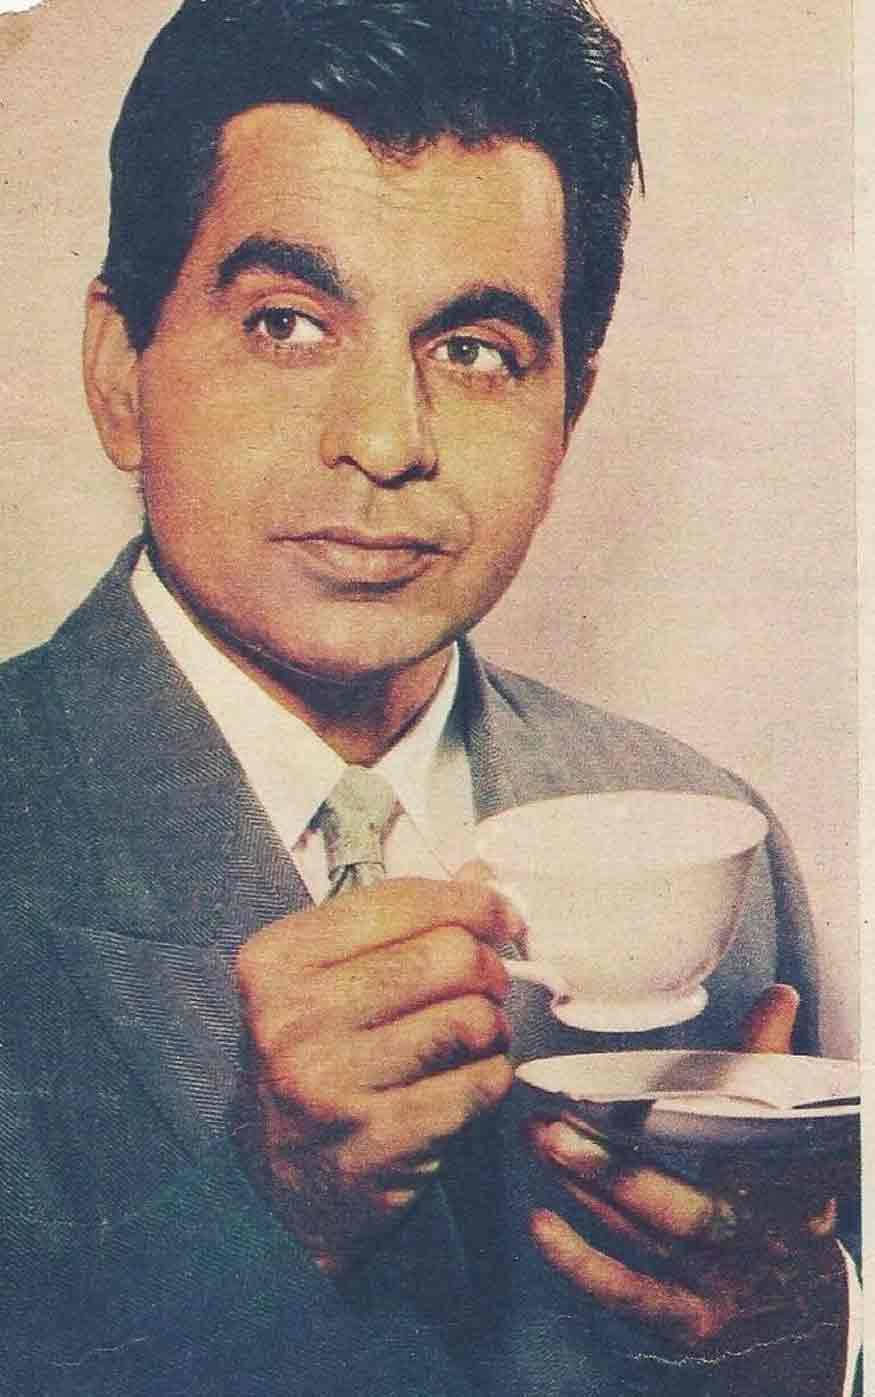 Dilip Kumar With A Cup Background